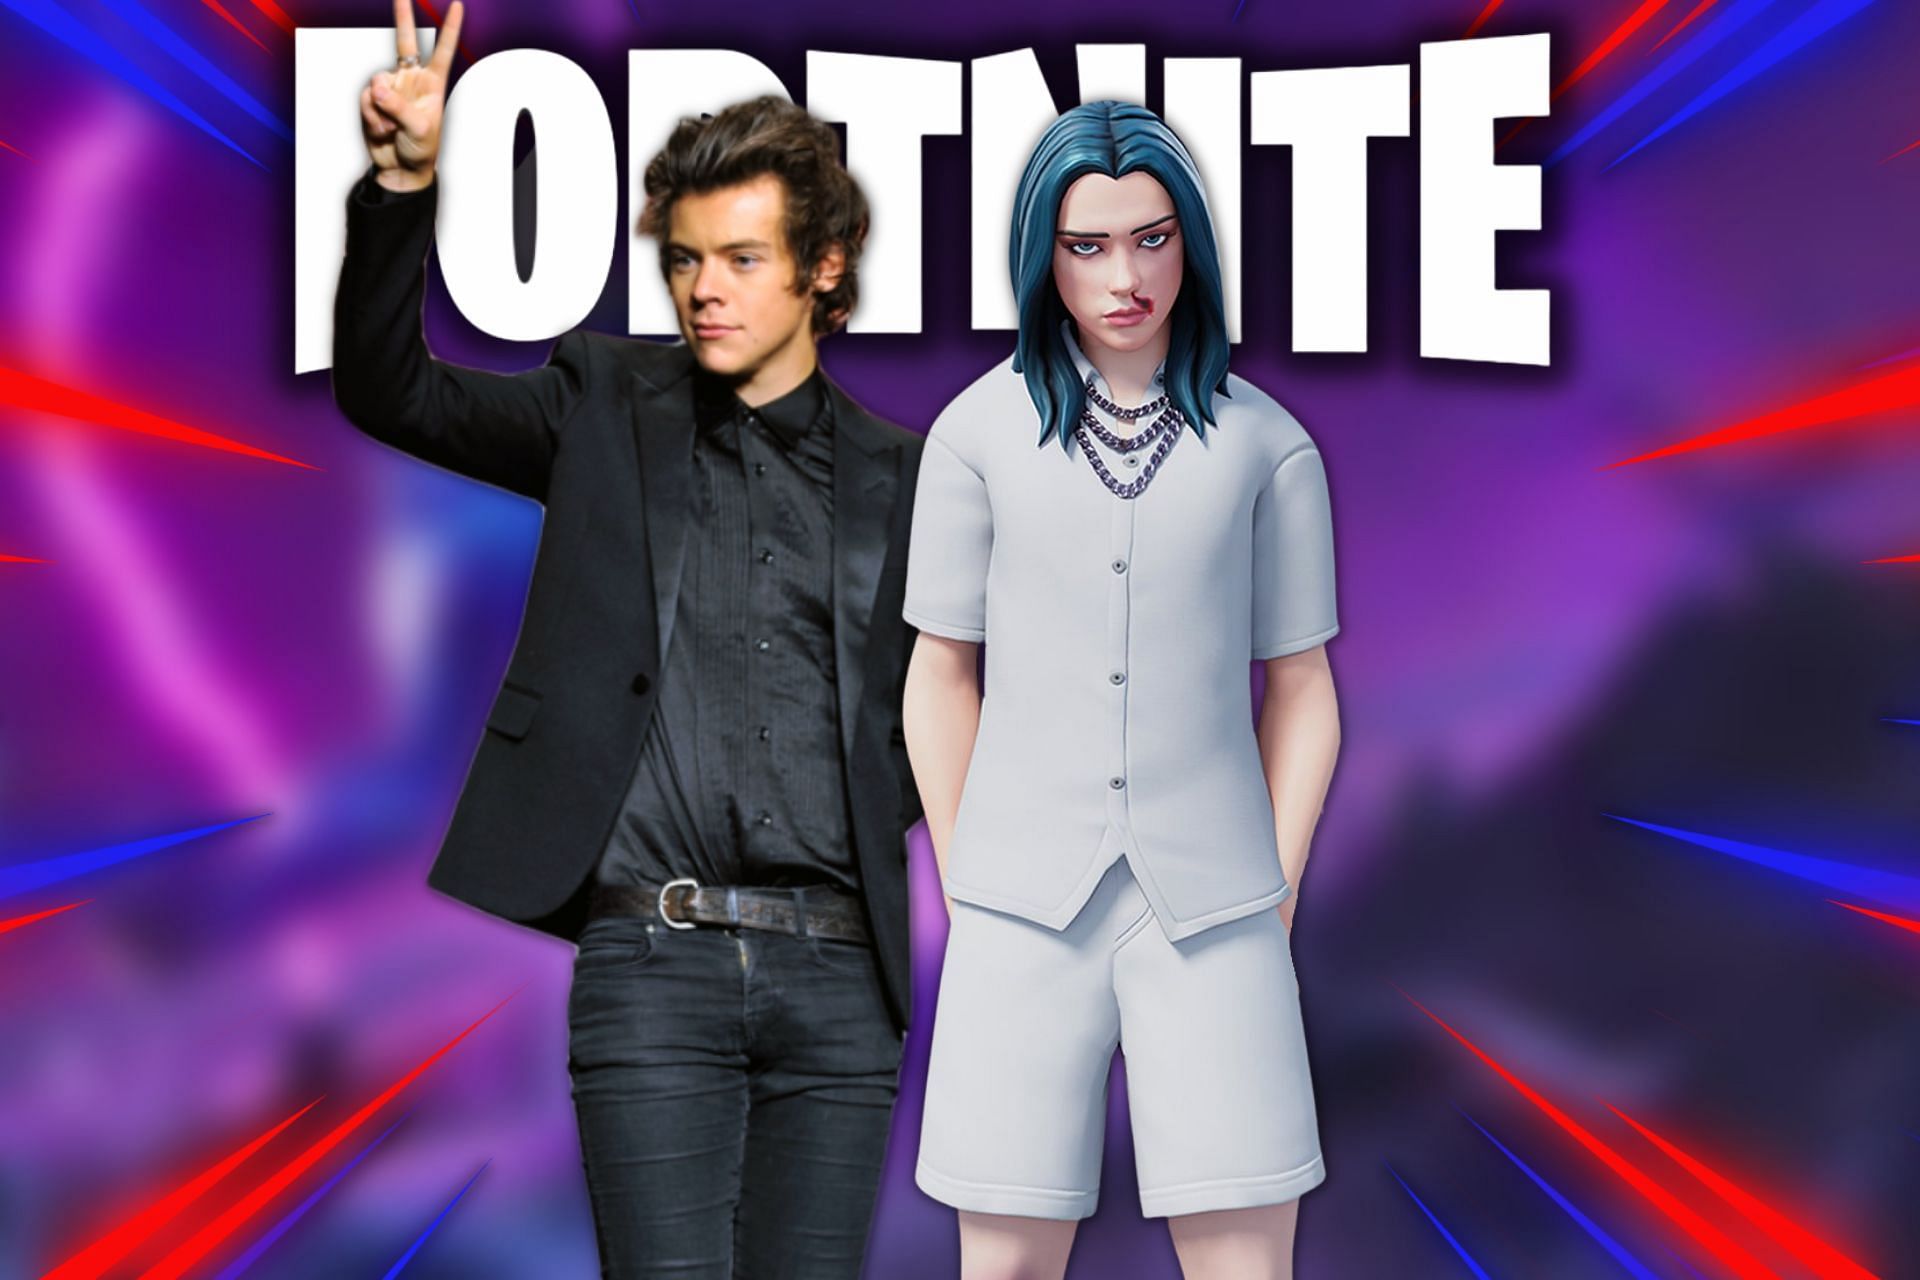 Billie Eilish and Harry Styles might be added to Fortnite during Chapter 3 Season 2 (Image via Sportskeeda)